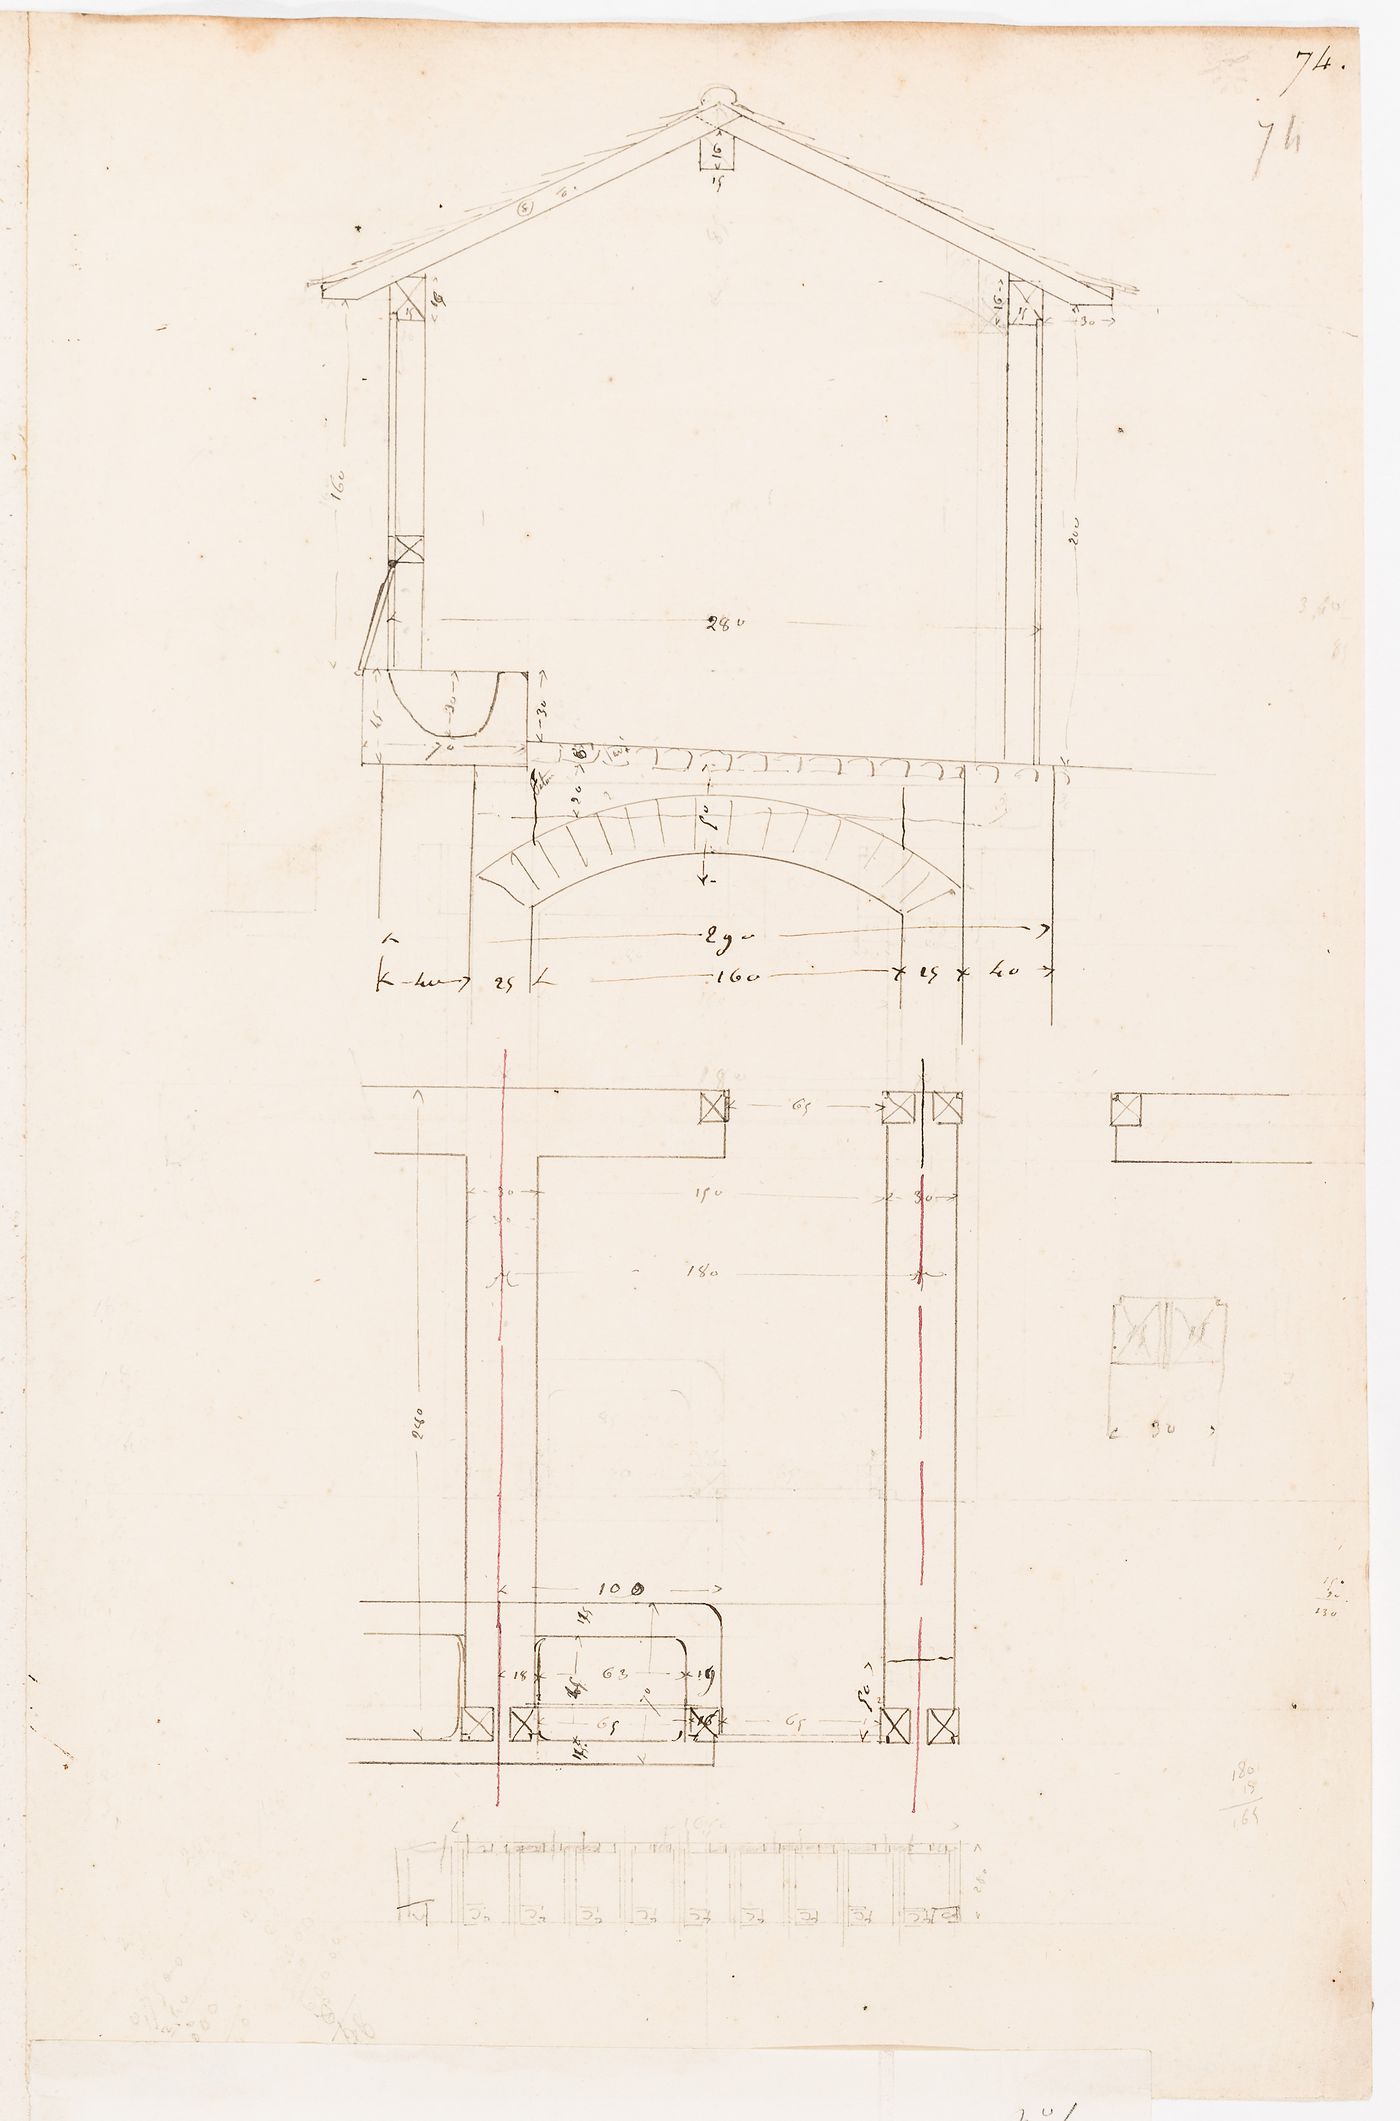 Project for a horse slaughterhouse, La Villette: Section and details for a "porcherie", probably connected to the horse slaughterhouse